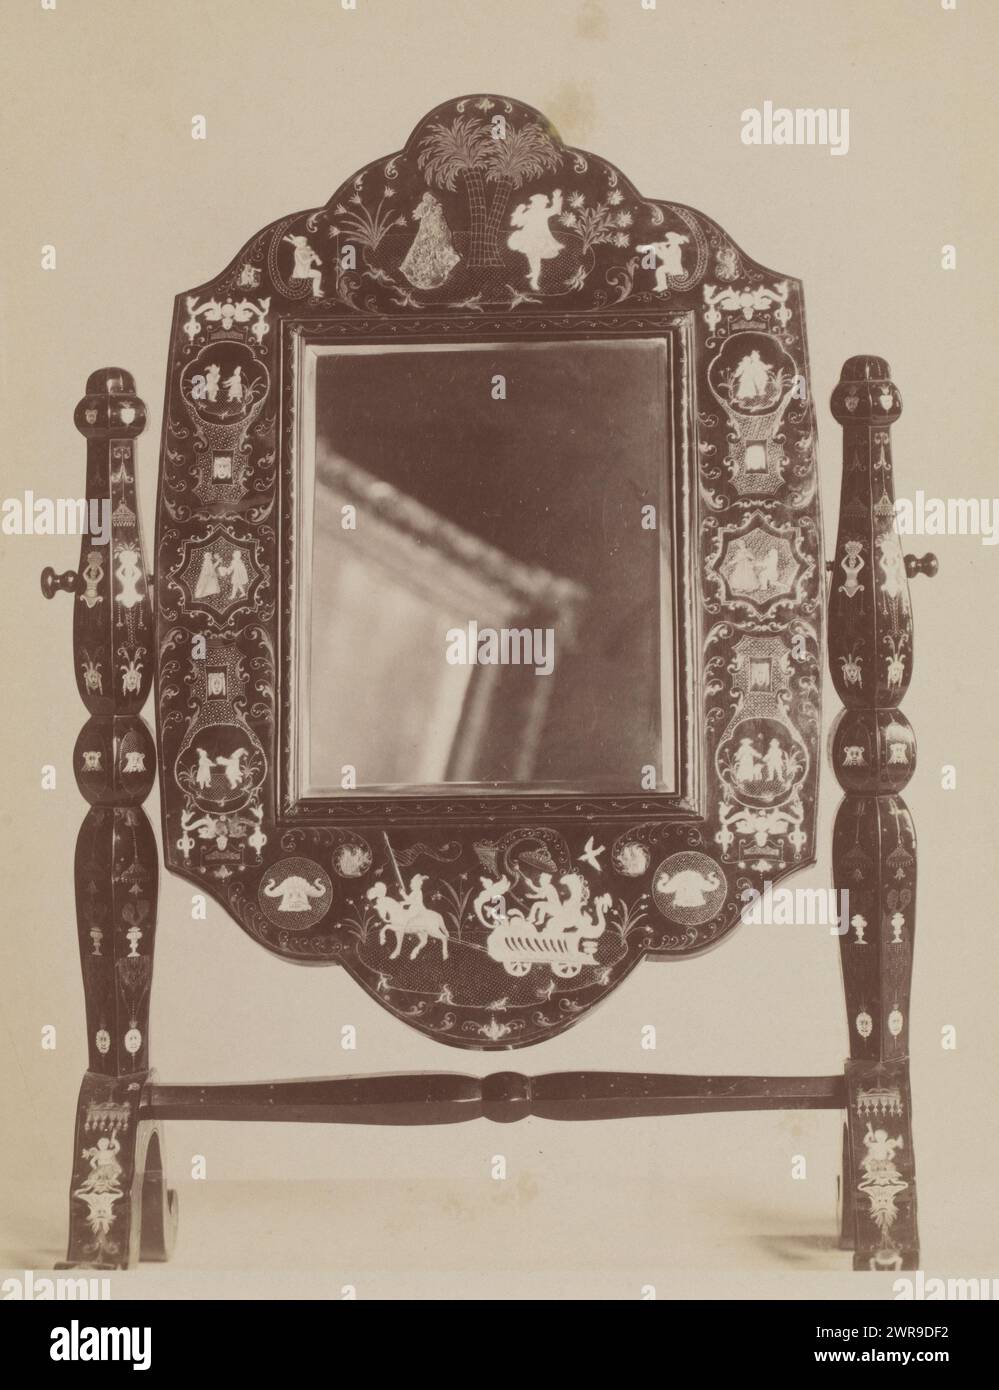 Shot of a mirror with a picture frame reflected in it. Shot of a richly decorated table mirror (18th century French) made of lacquer, beautifully inlaid with possibly ivory edge decorations. A picture frame is visible in the mirror. Comes from a furniture factory in rue Faubourg St. Antoine, the 19th century artists' district in Paris., anonymous, France, c. 1900, photographic support, albumen print, height 201 mm × width 162 mm × height 212 mm × width 172 mm, photograph Stock Photo